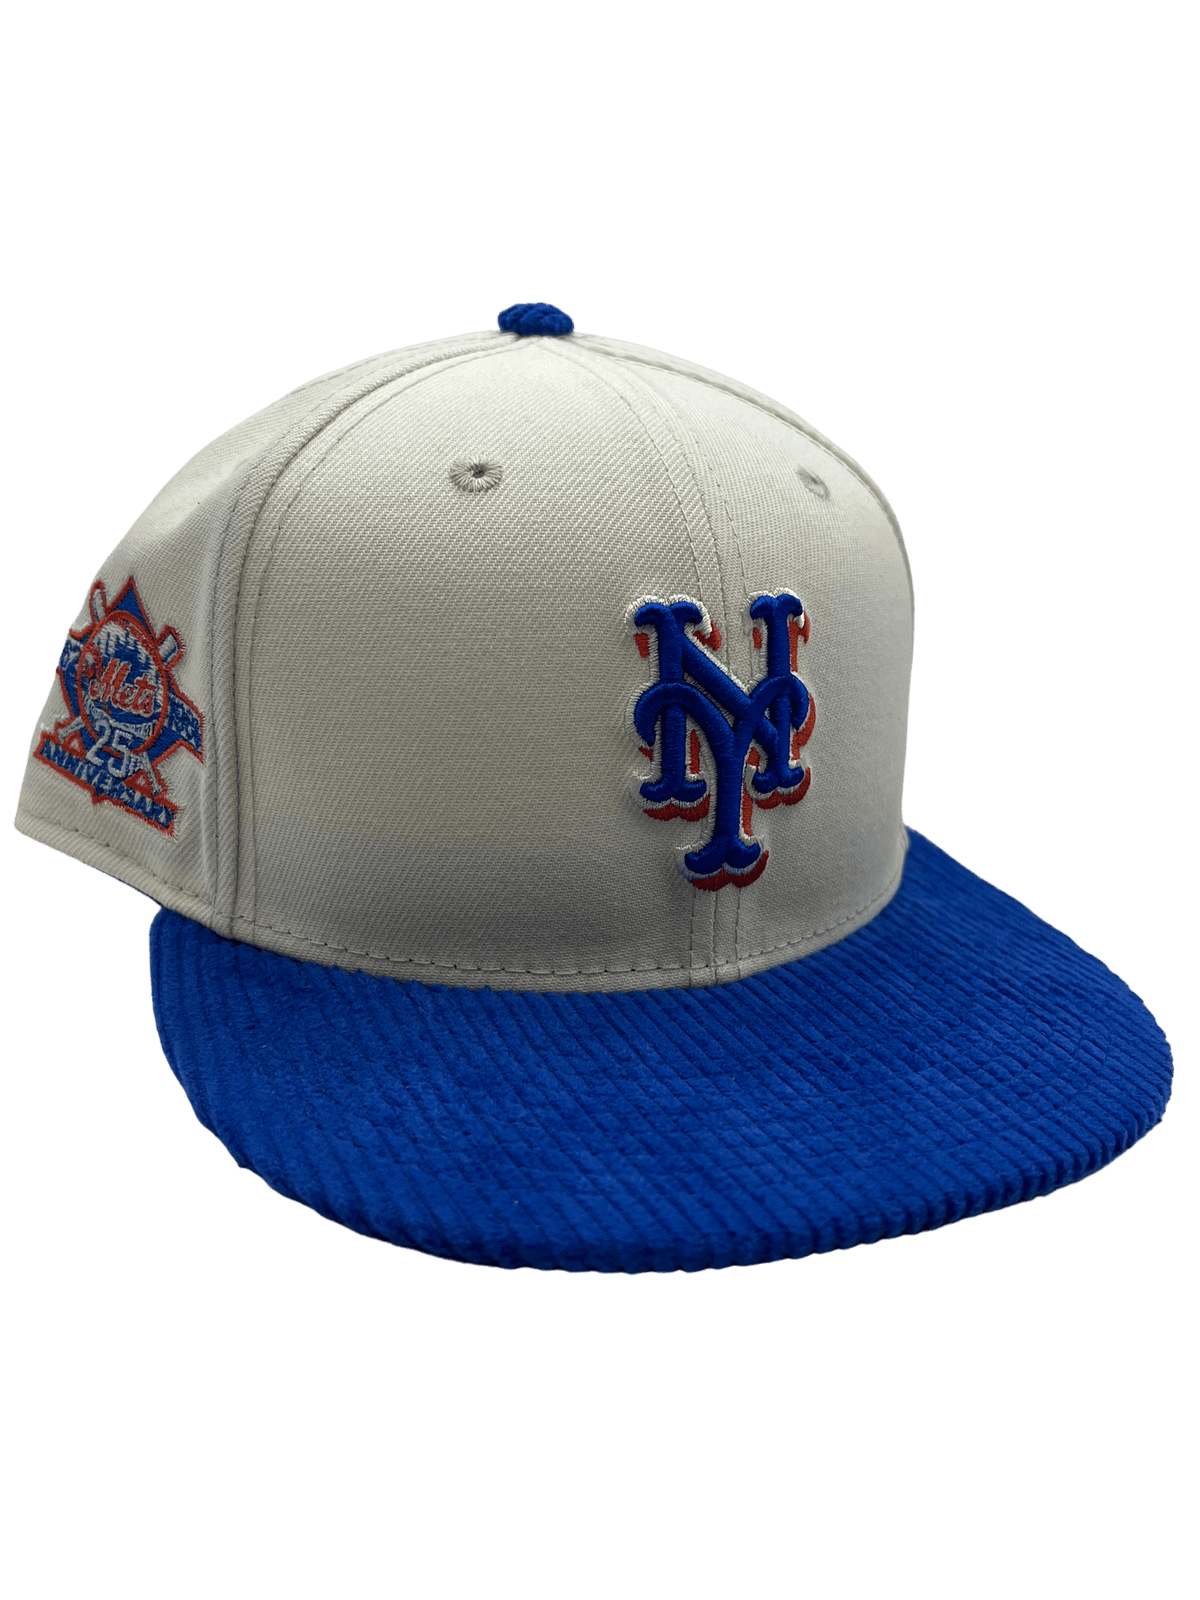 Men's New Era Red York Mets White Logo 59FIFTY Fitted Hat